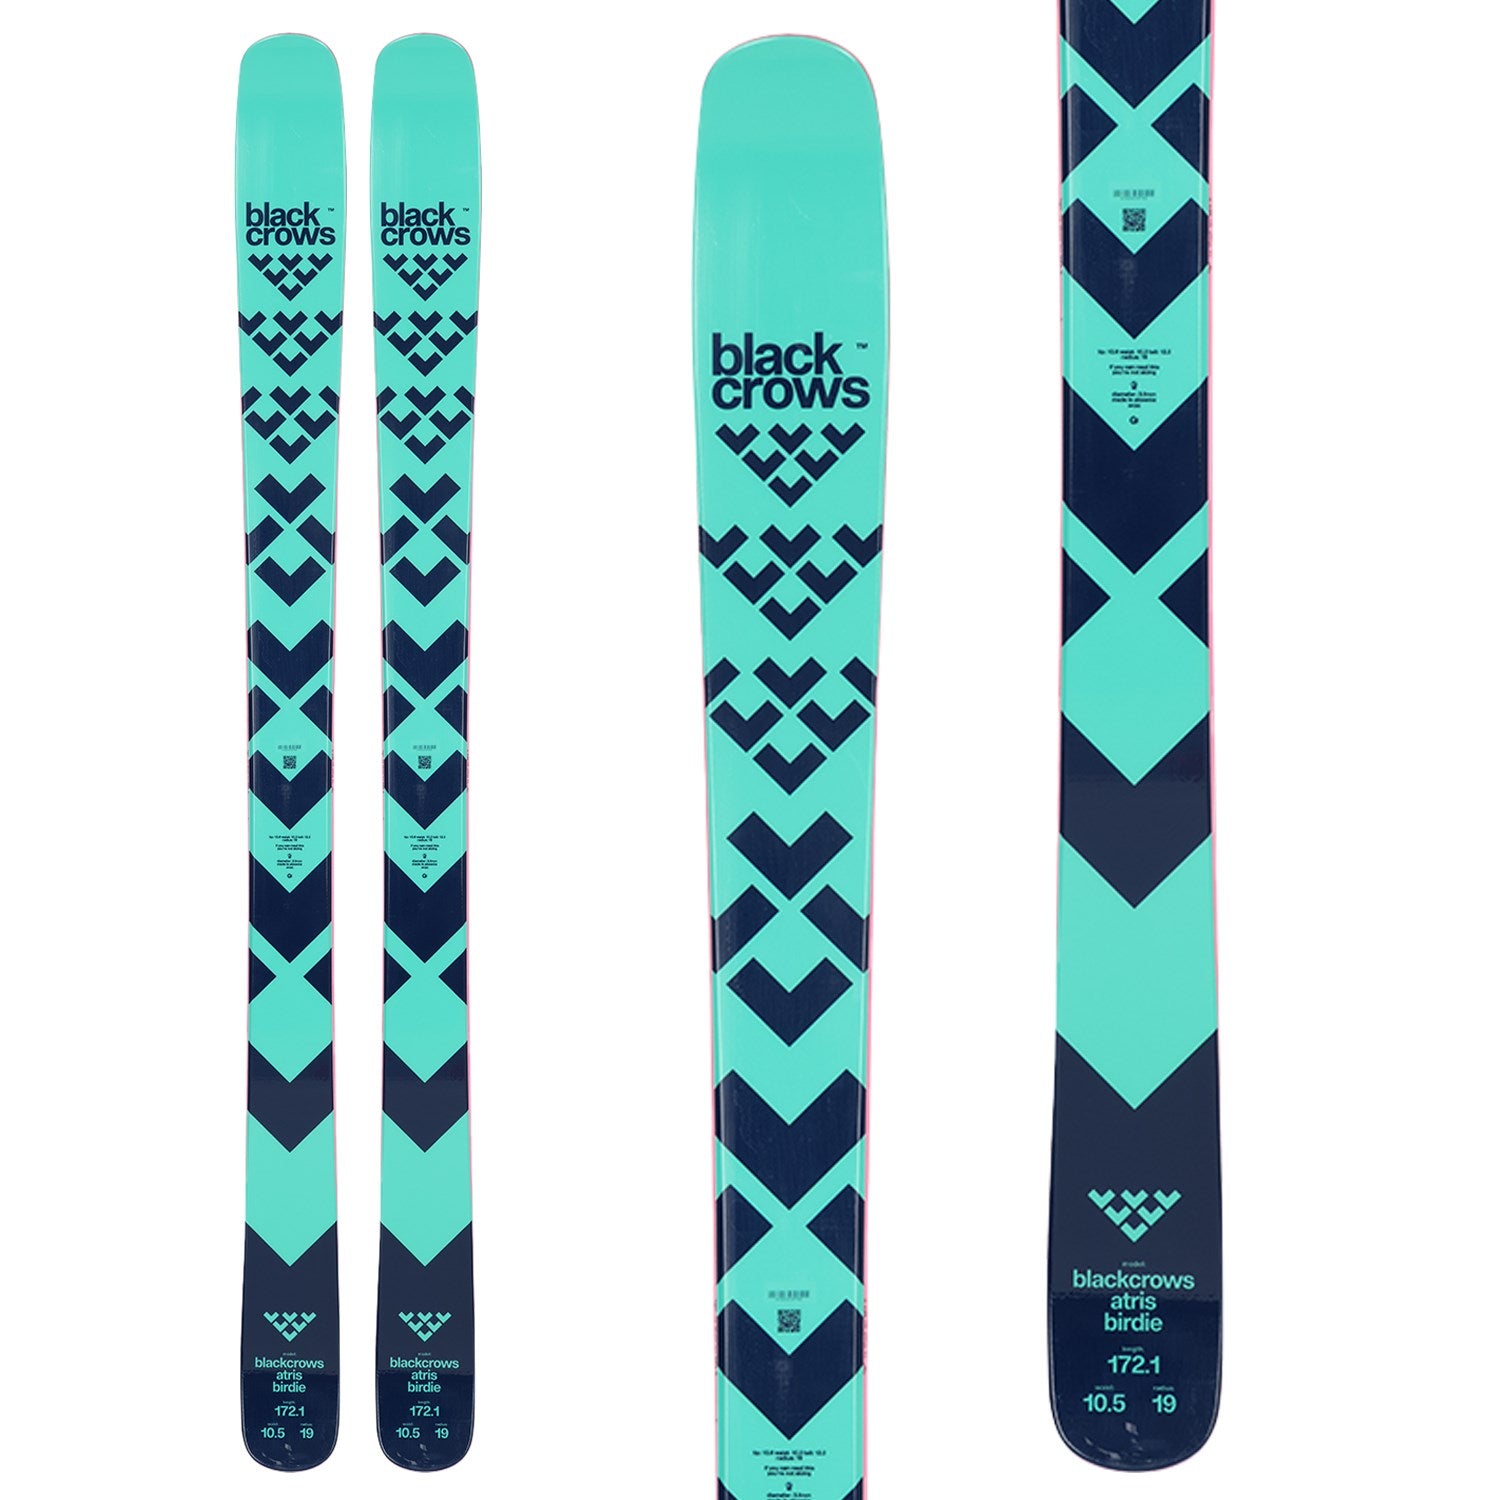 Skis without bindings